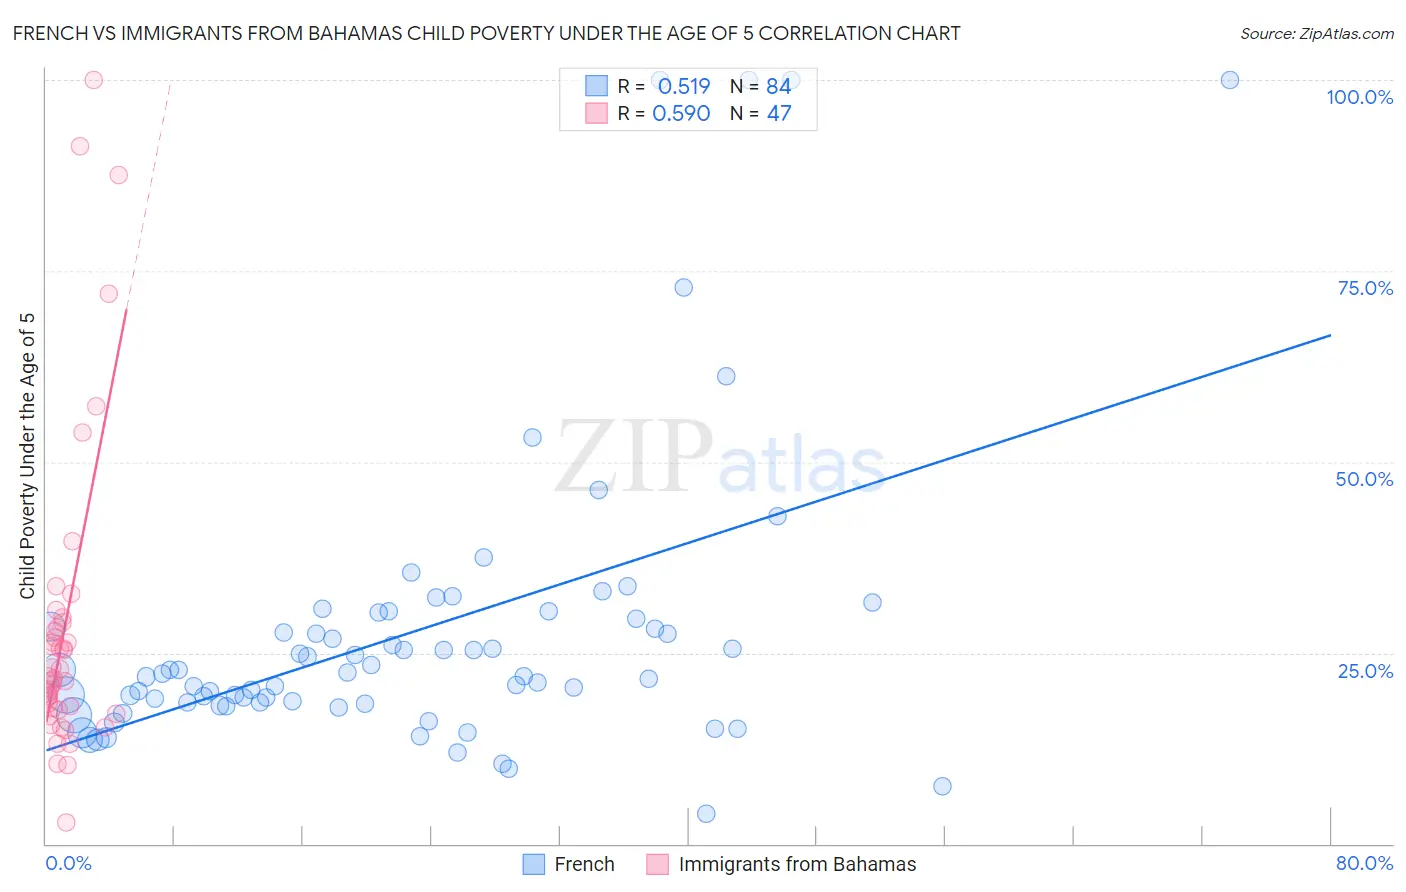 French vs Immigrants from Bahamas Child Poverty Under the Age of 5